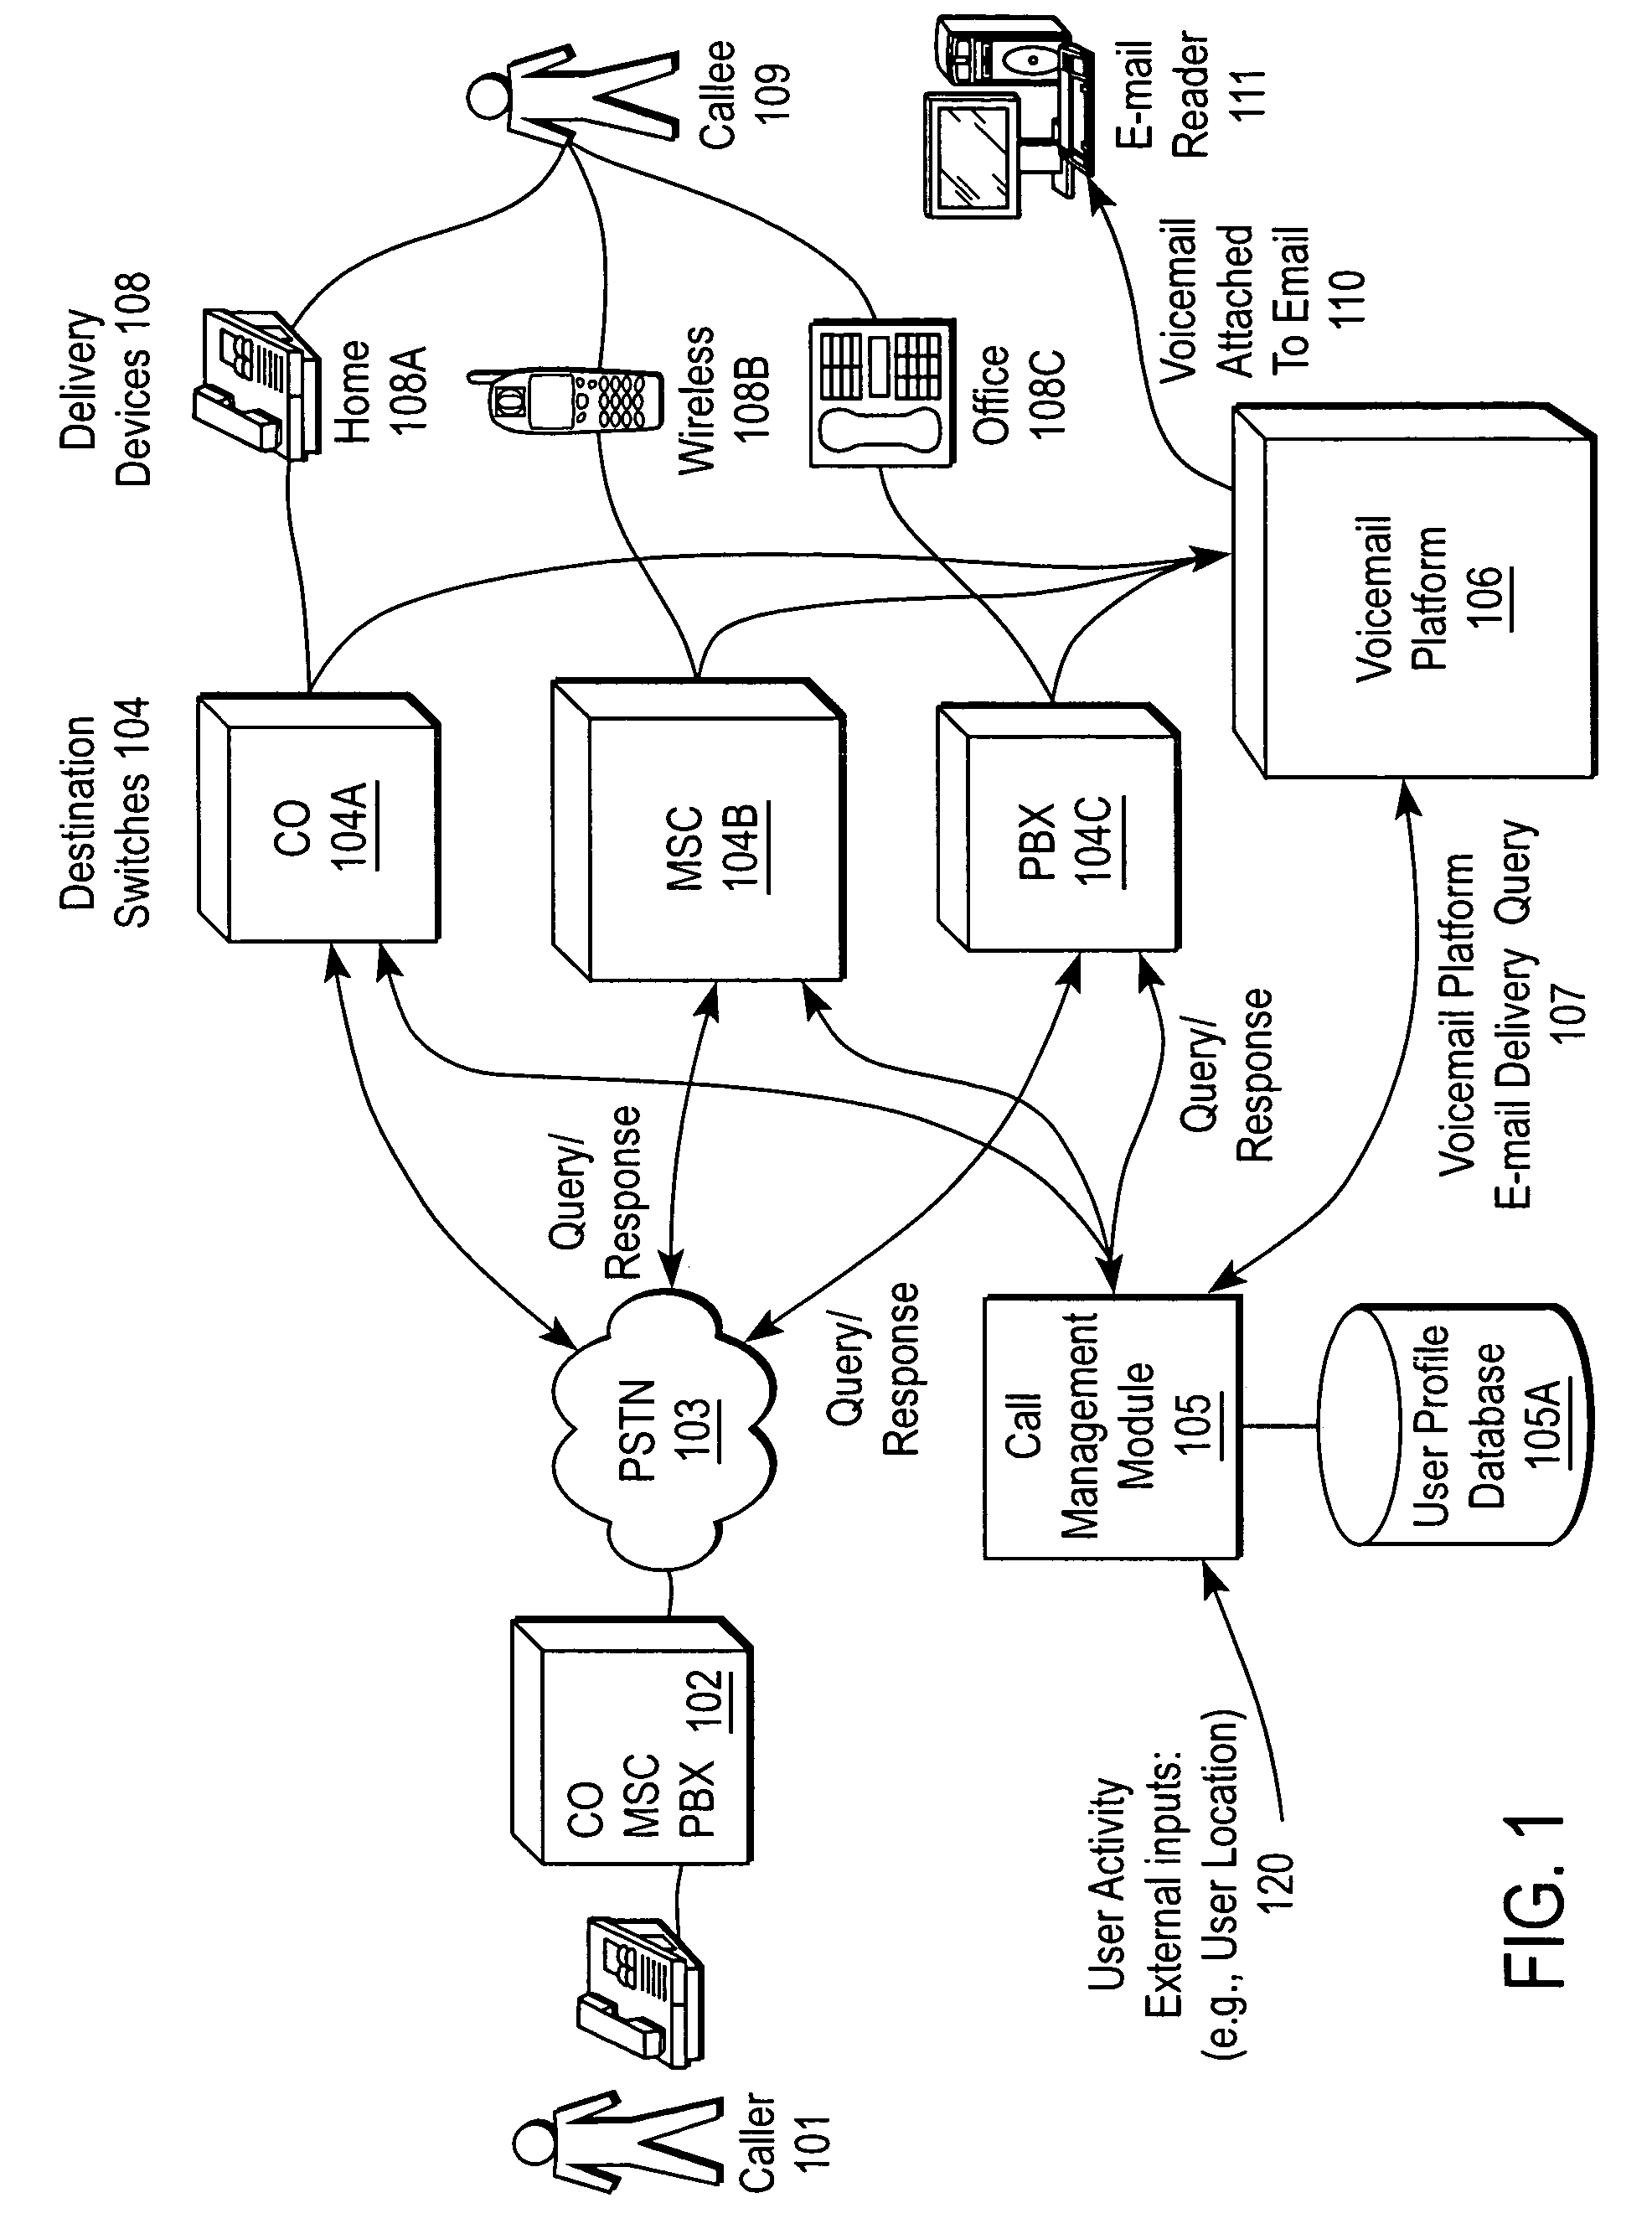 Wireless device to manage cross-network telecommunication services